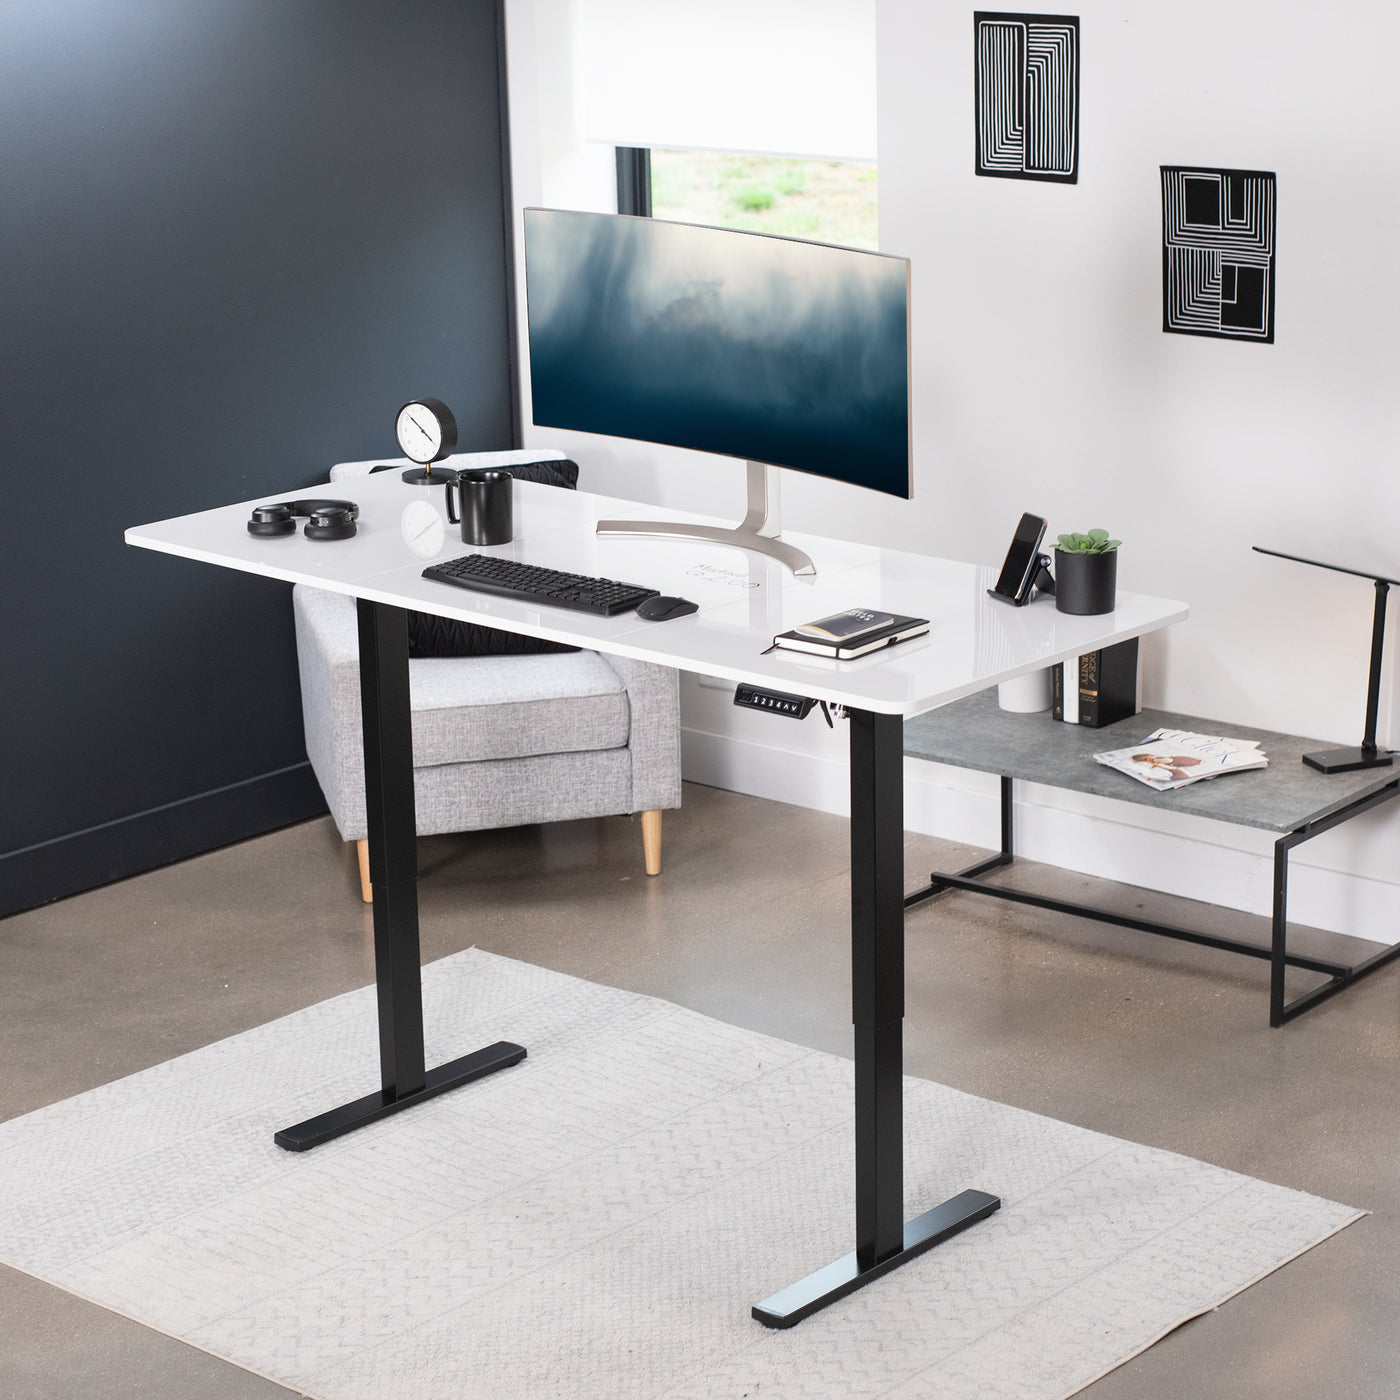 Durable dry erase sit to stand desk tabletop workstation with wide surface space.